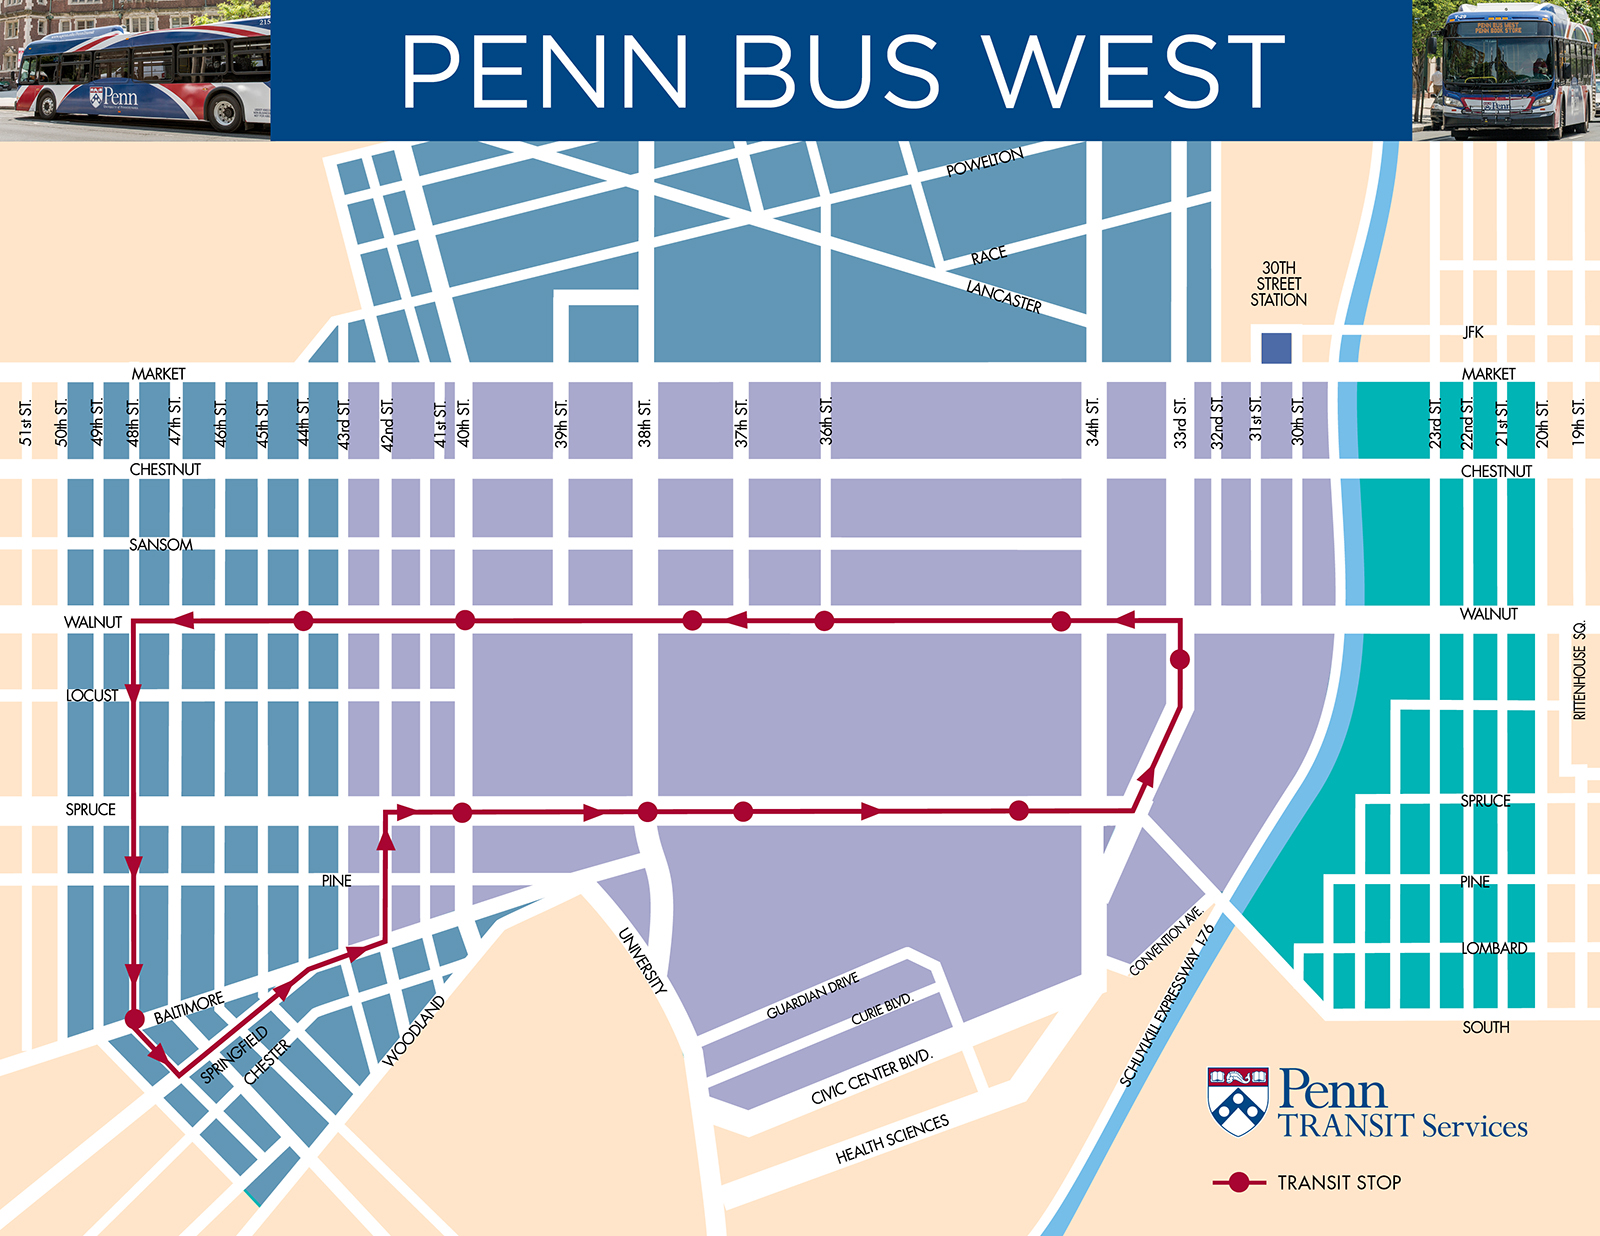 Map of the Penn Bus West route